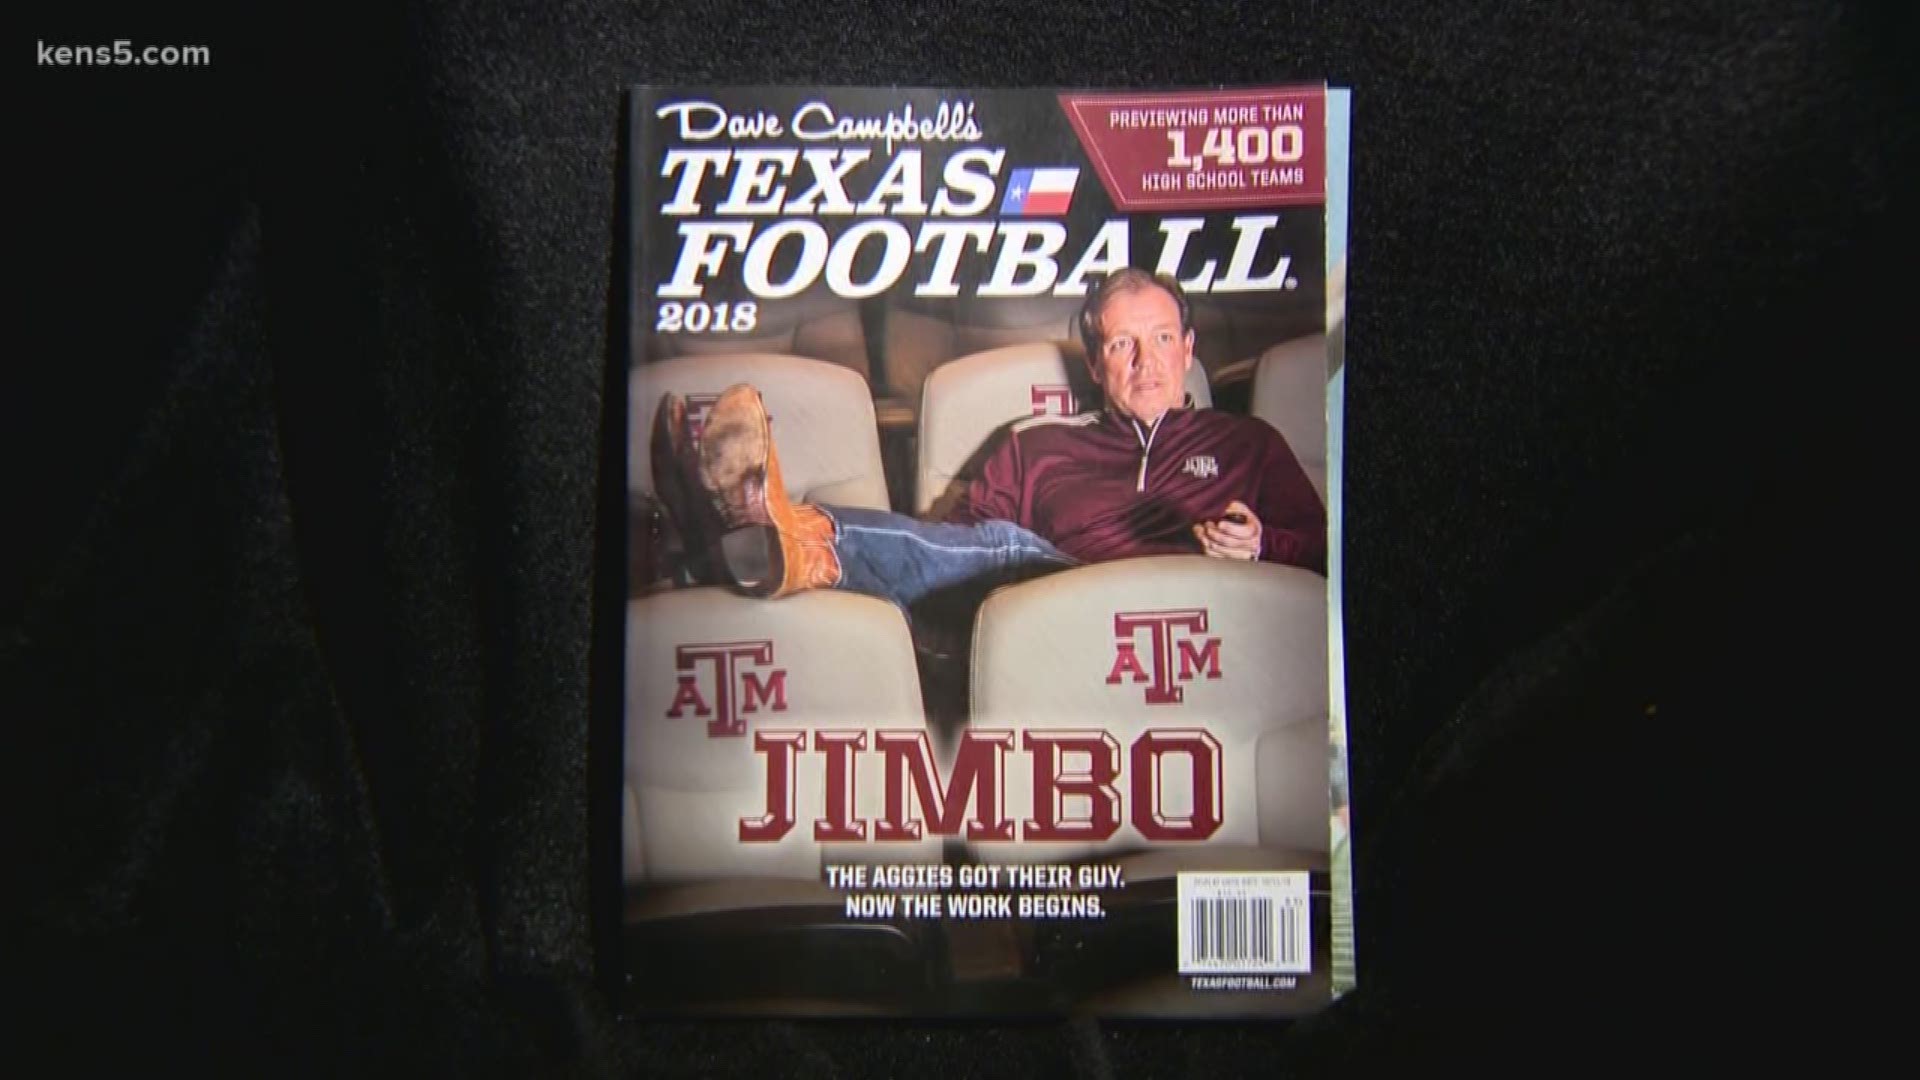 For Texas A&M fans the football season cannot begin soon enough, that is all due to the fact that Jimbo Fisher is the head coach. He has caused quite a stir across the state of Texas, in fact he is the cover model for the Dave Campbell Texas football maga